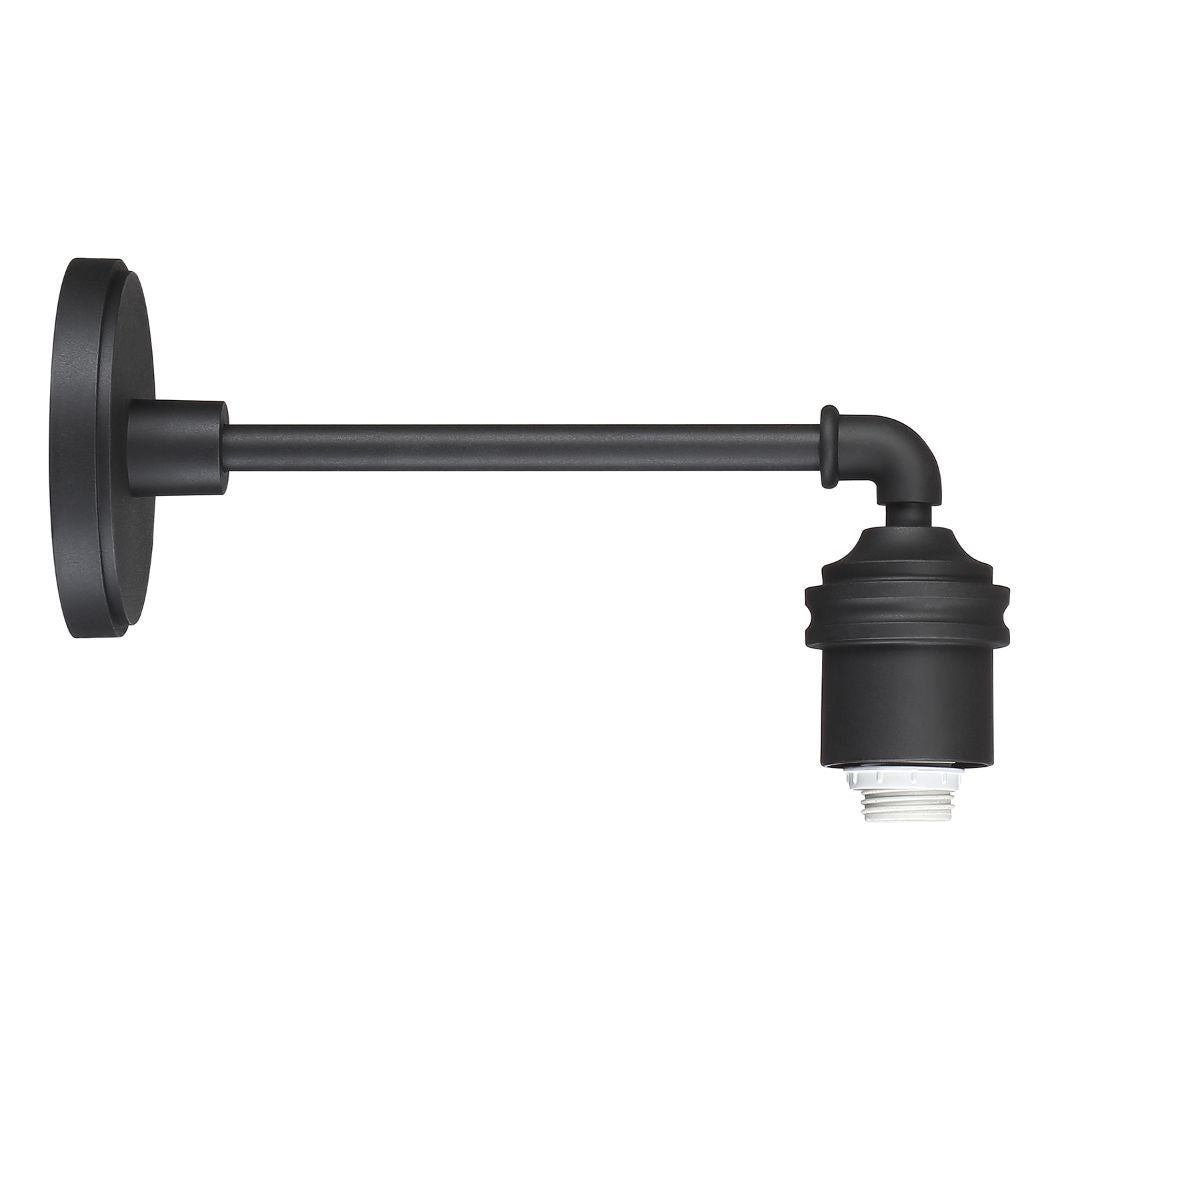 RLM Outdoor Wall Mount 15 in. Straight Arm Black Finish